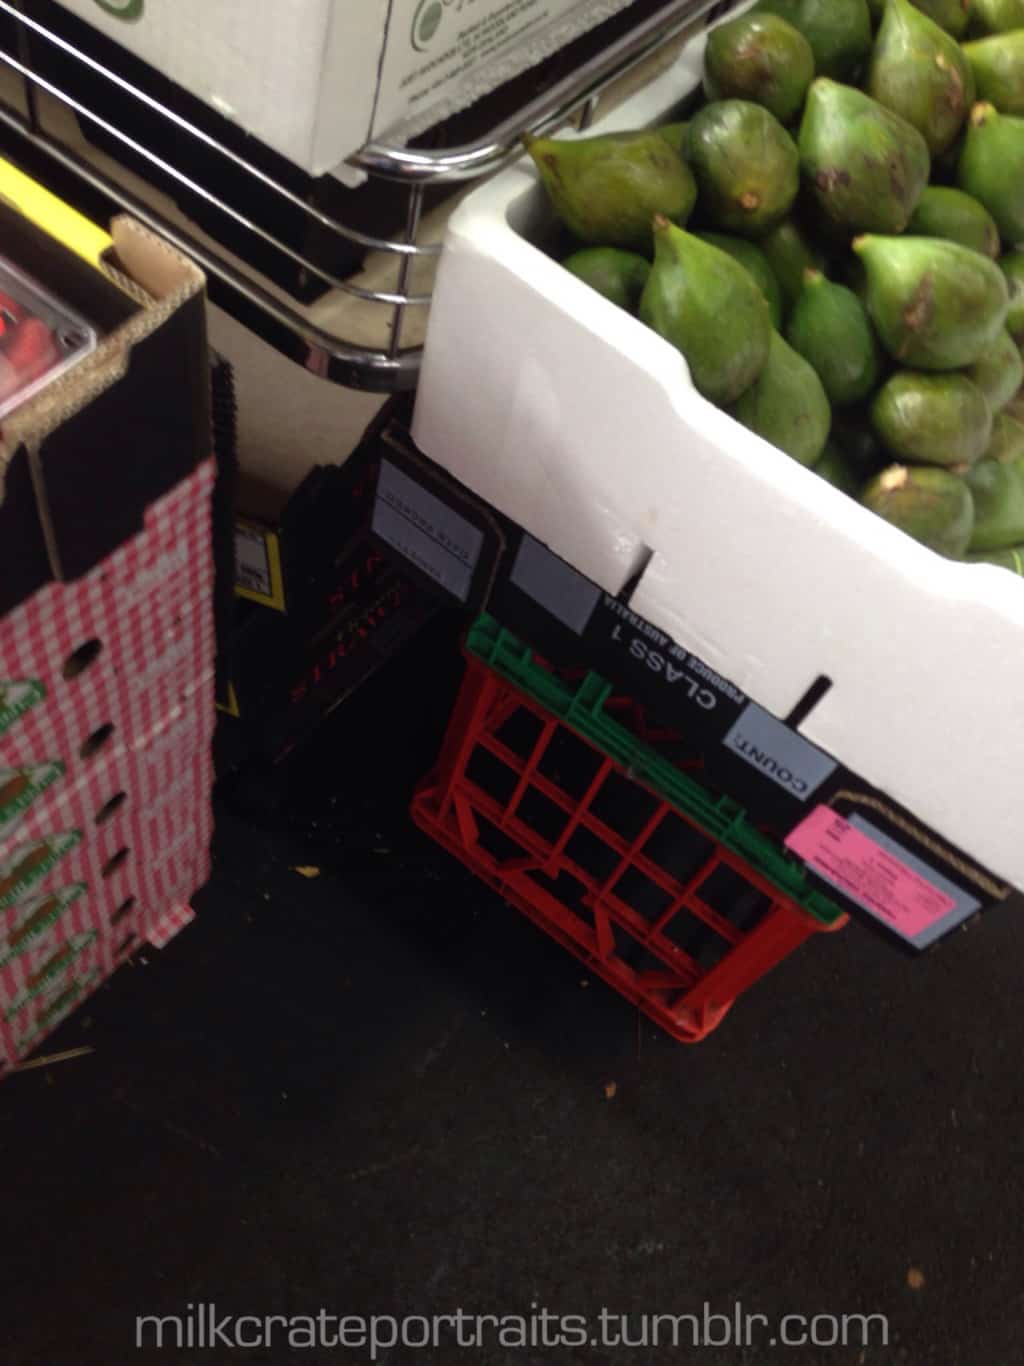 Figs and crates